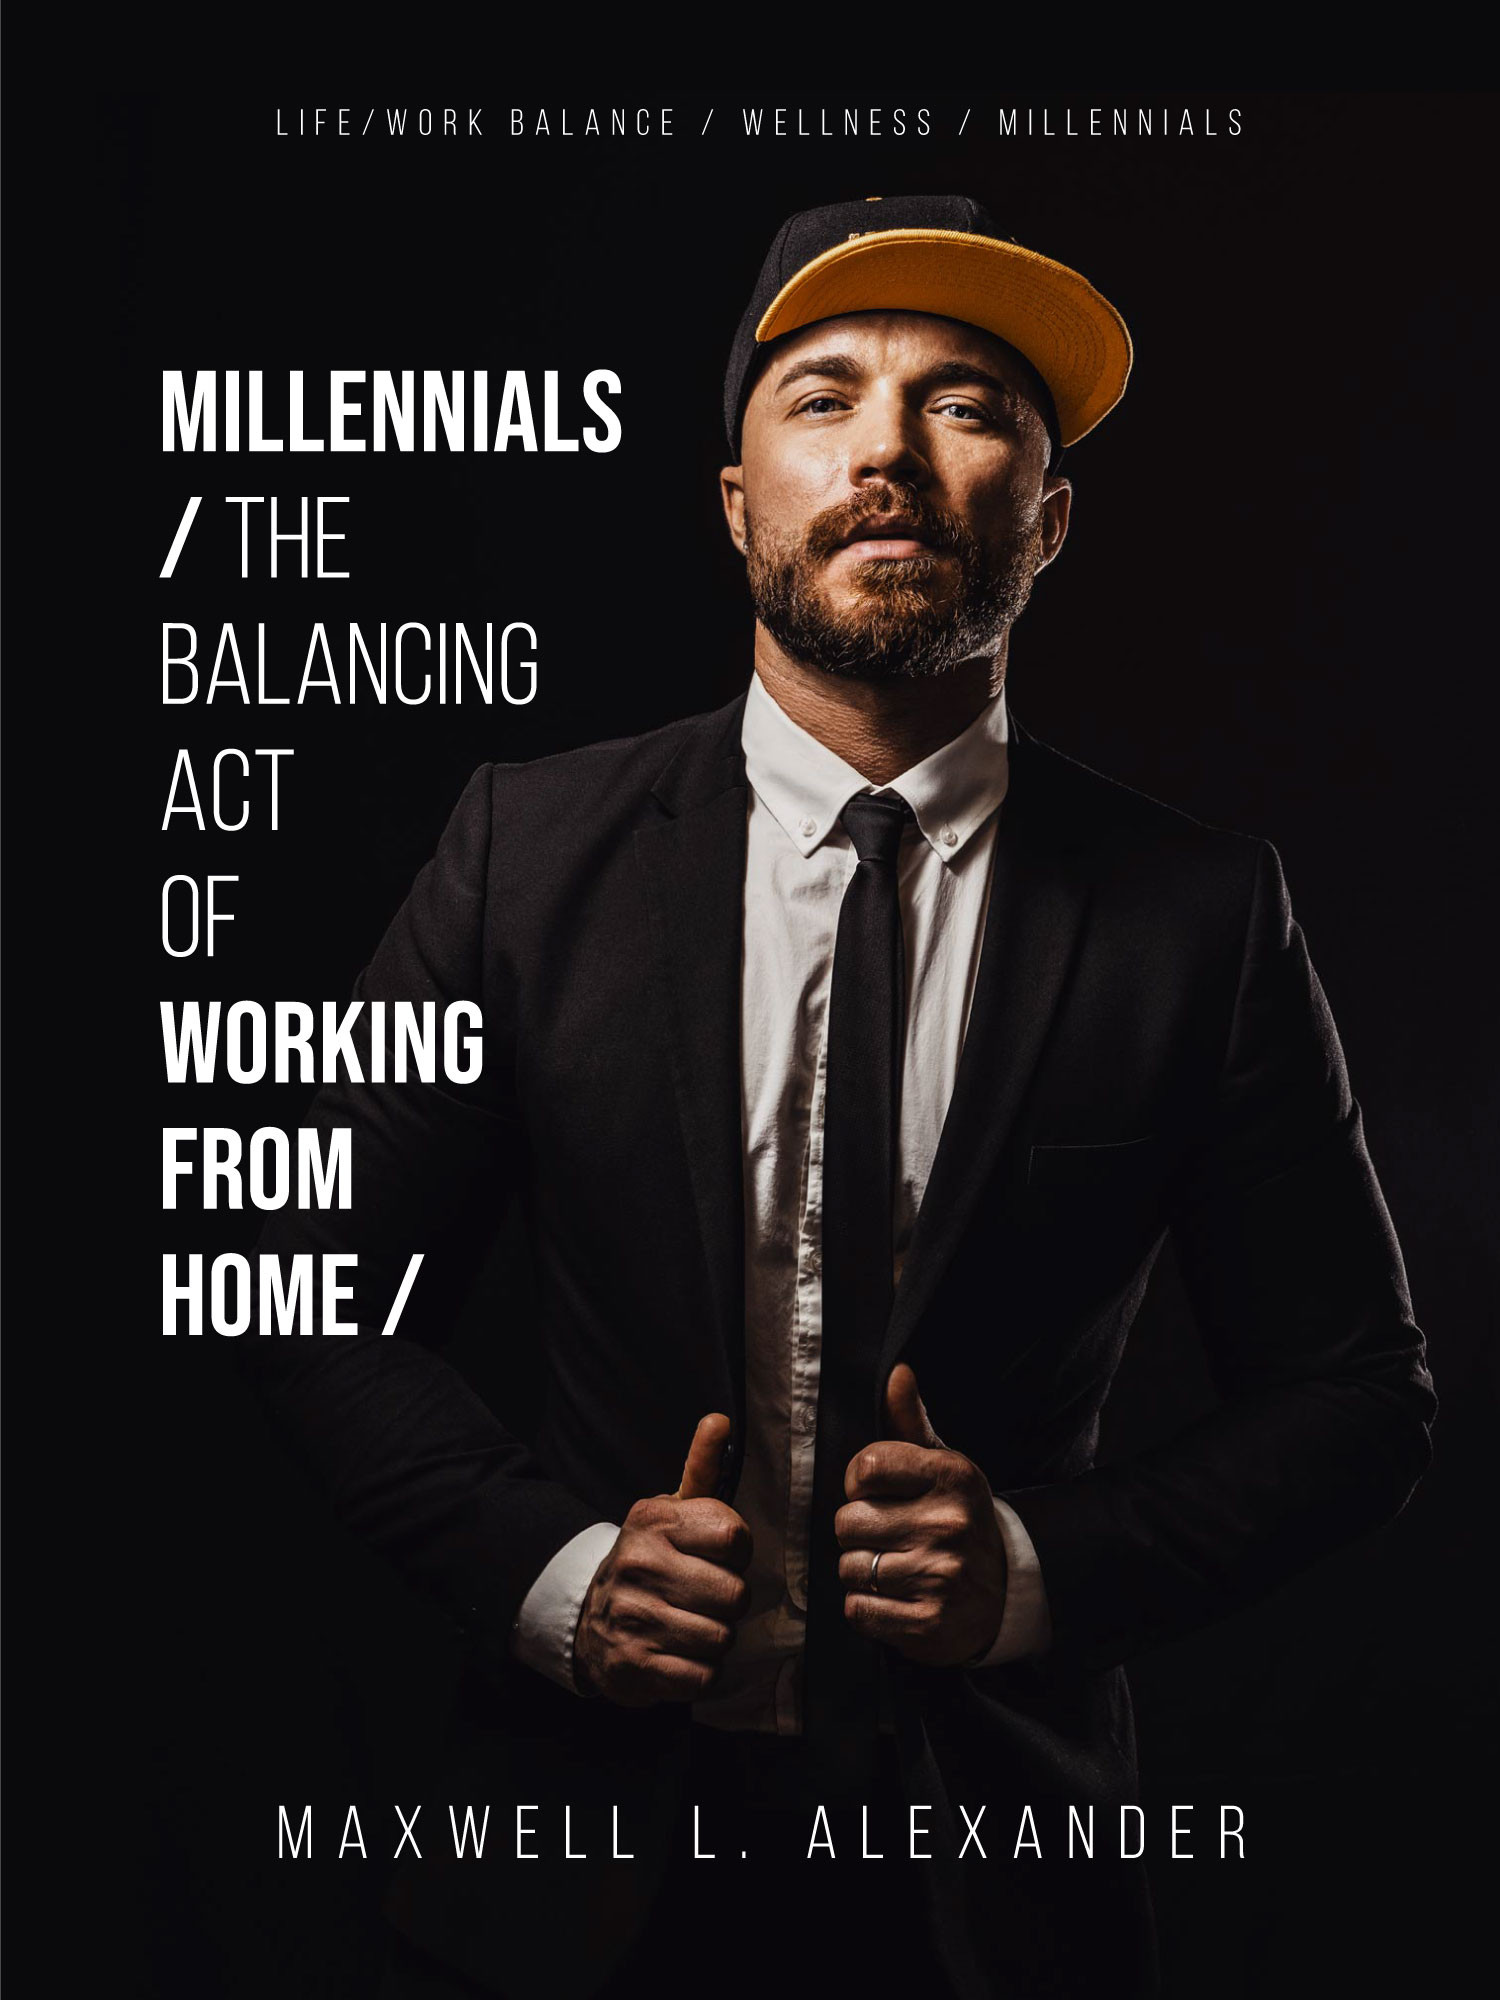 Work from Home: Starting the Journey of Claiming Your Freedom – Presented by Maxwell Alexander and his new book "Millennials – The Balancing Act of Working from Home" on Amazon Kindle